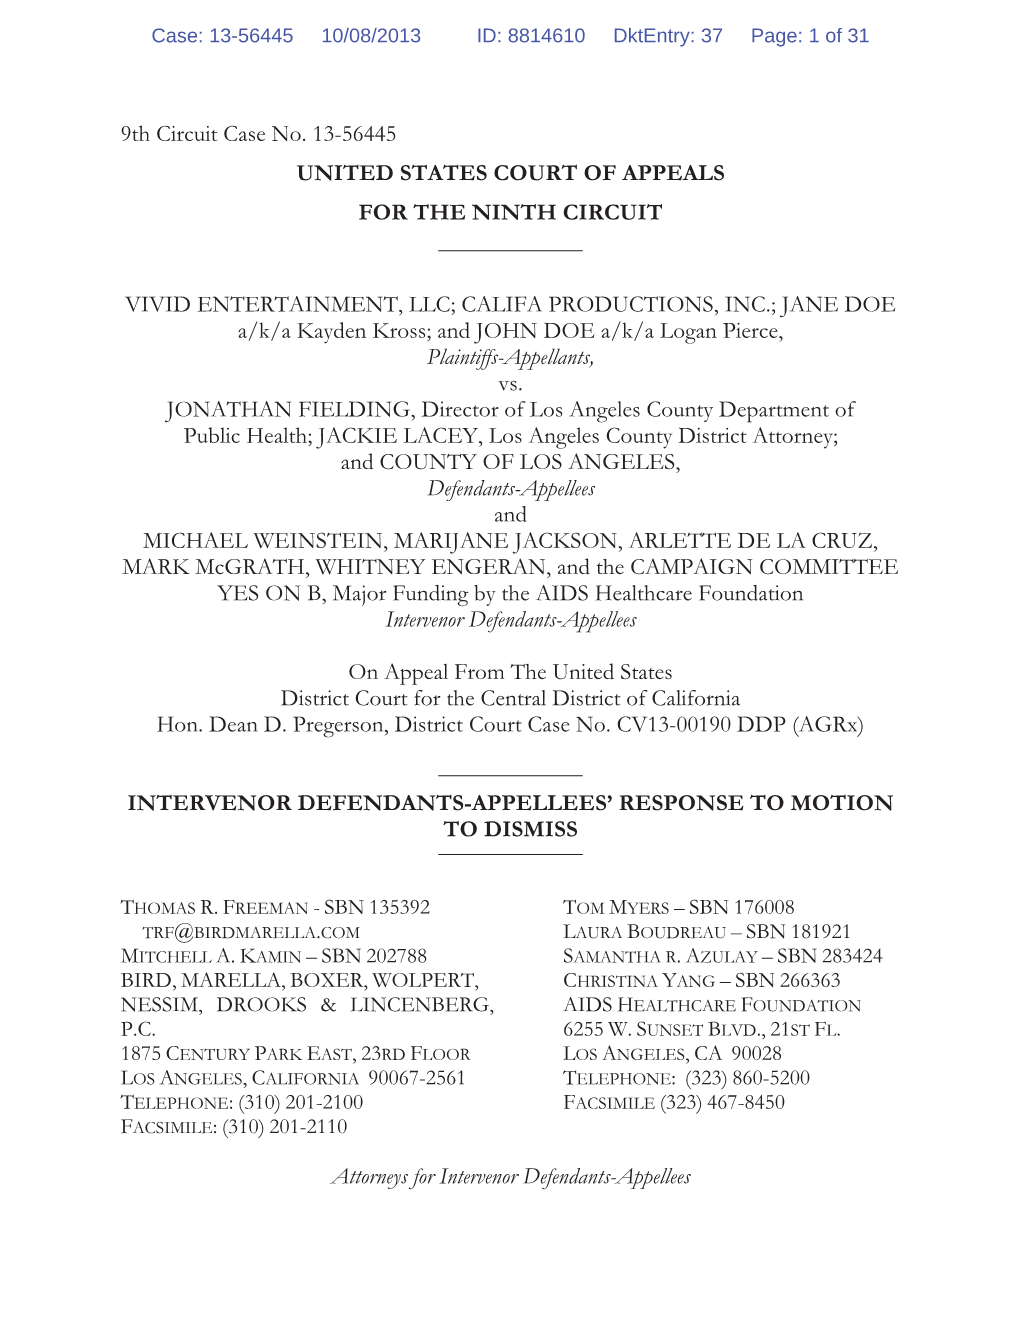 9Th Circuit Case No. 13-56445 UNITED STATES COURT of APPEALS for the NINTH CIRCUIT VIVID ENTERTAINMENT